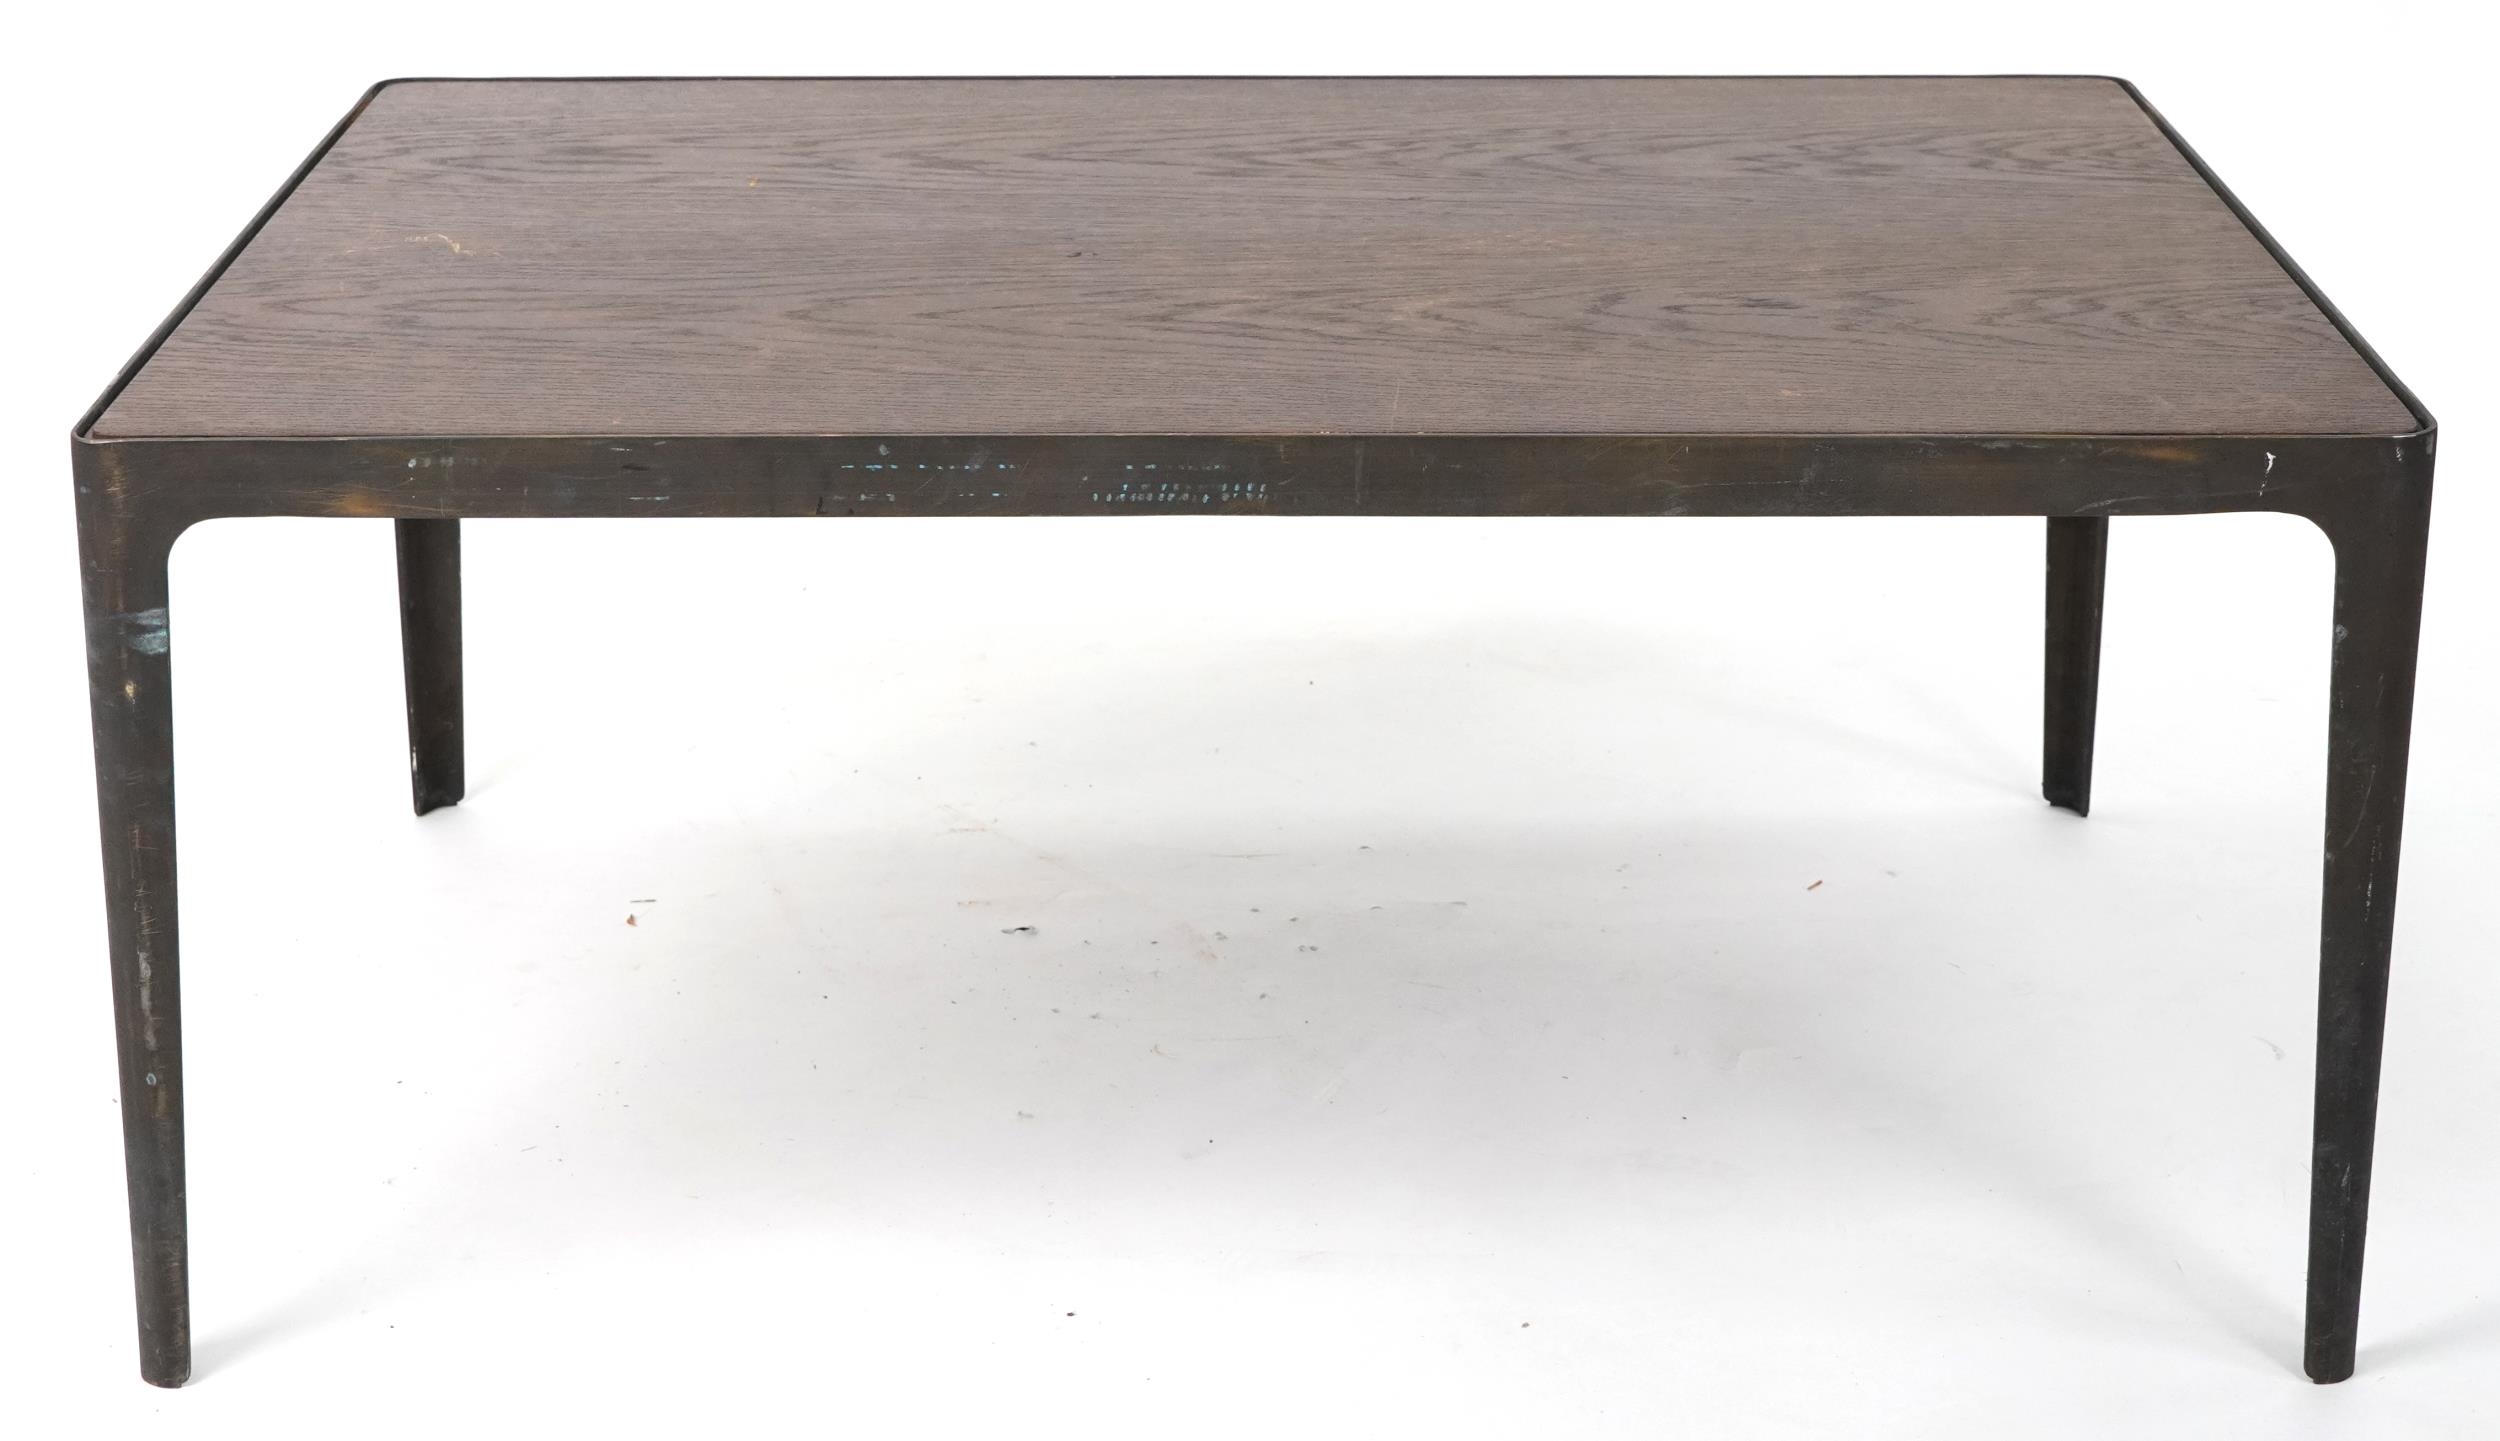 Industrial painted metal and hardwood rectangular coffee table, 45cm H x 100cm W x 70cm D - Image 2 of 4